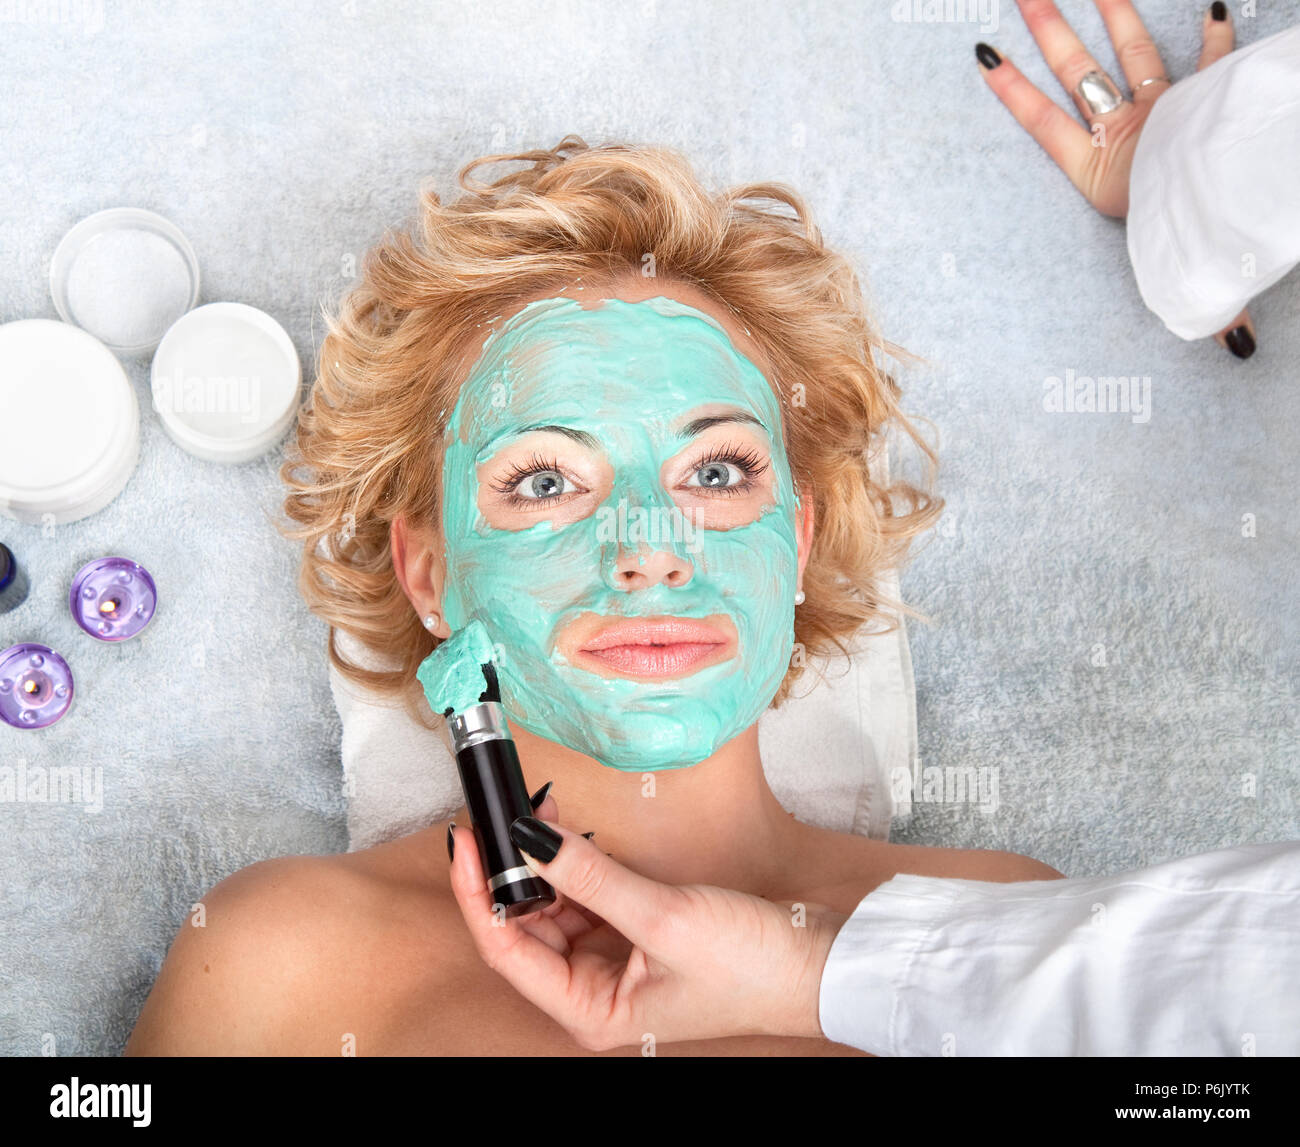 Spa thermal mud face pack on woman face Stock Photo